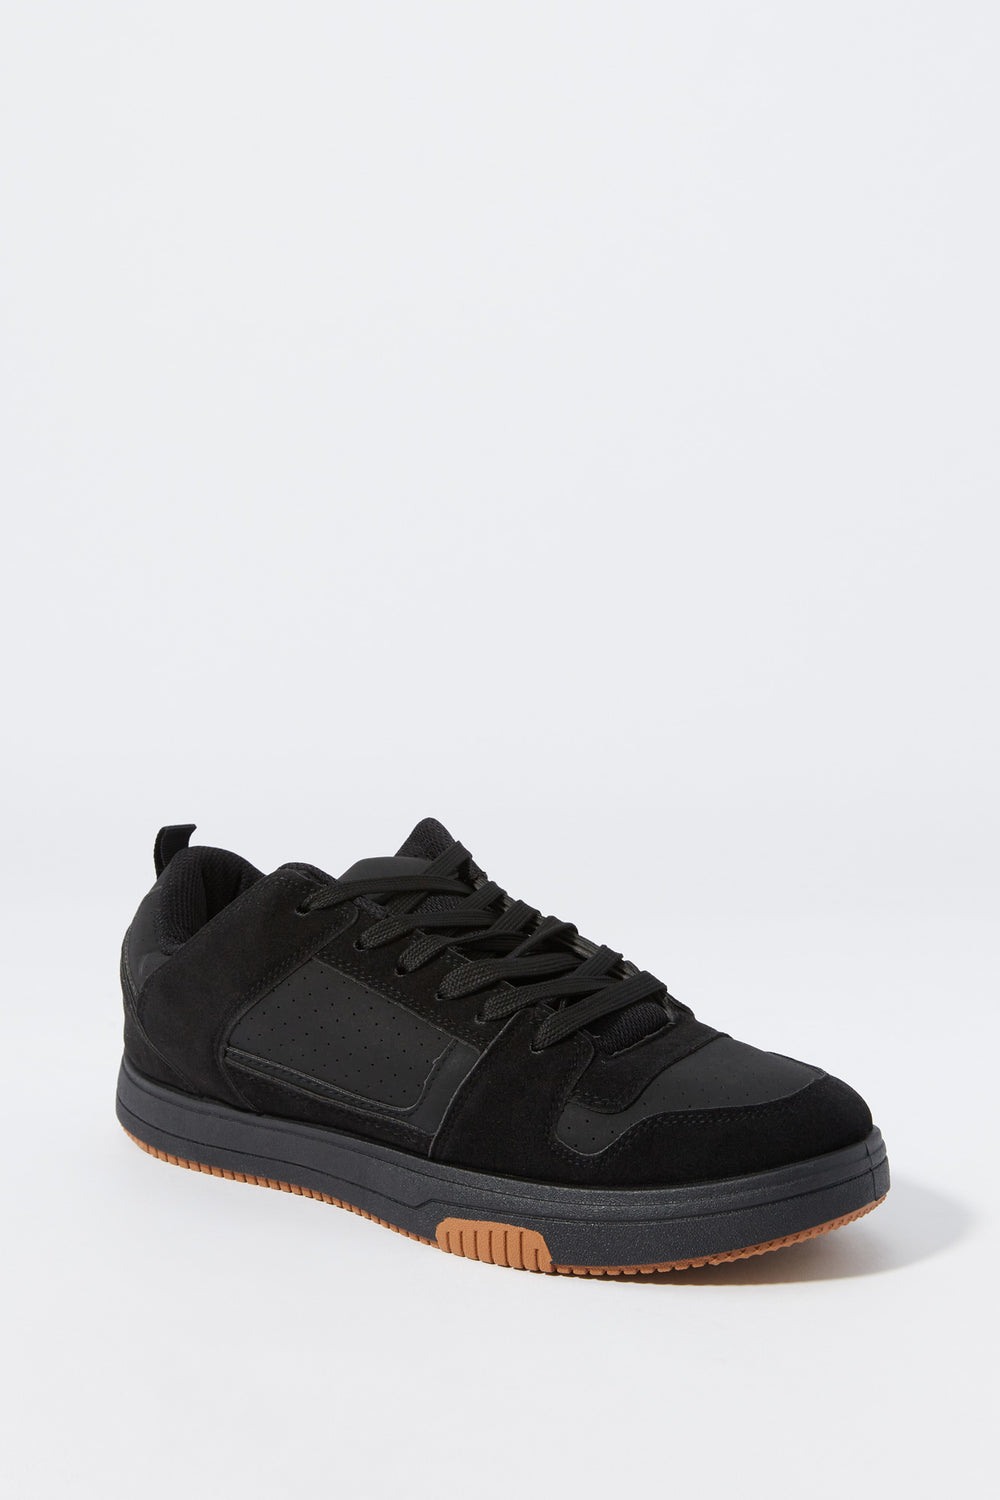 Low Top Casual Chunky Sneaker Low Top Casual Chunky Sneaker 8